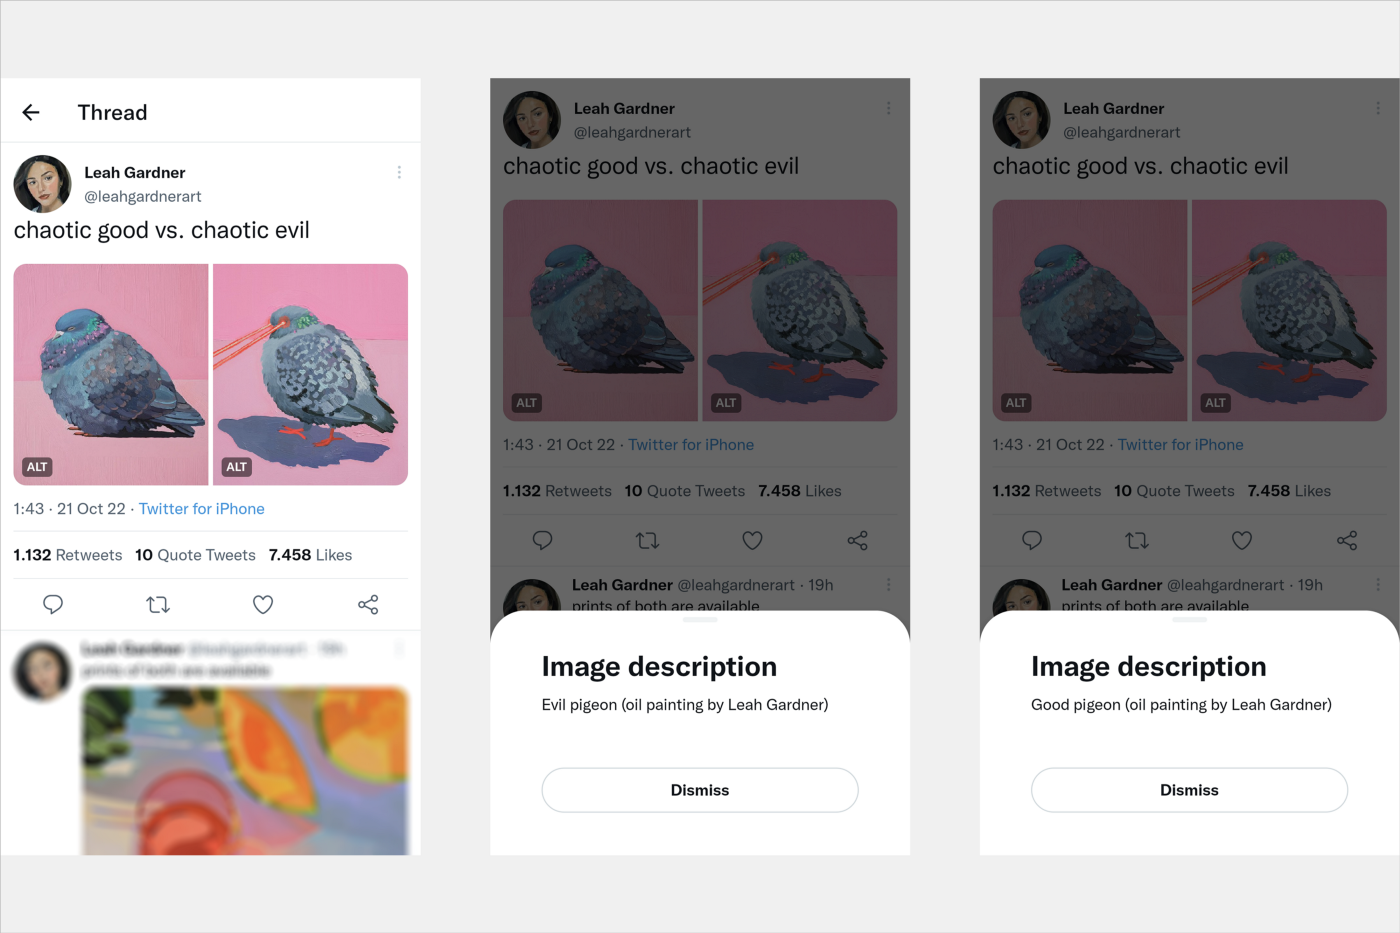 A tweet by Leah Gardner with the “evil pigeon” and “good pigeon” paintings and generic image descriptions.